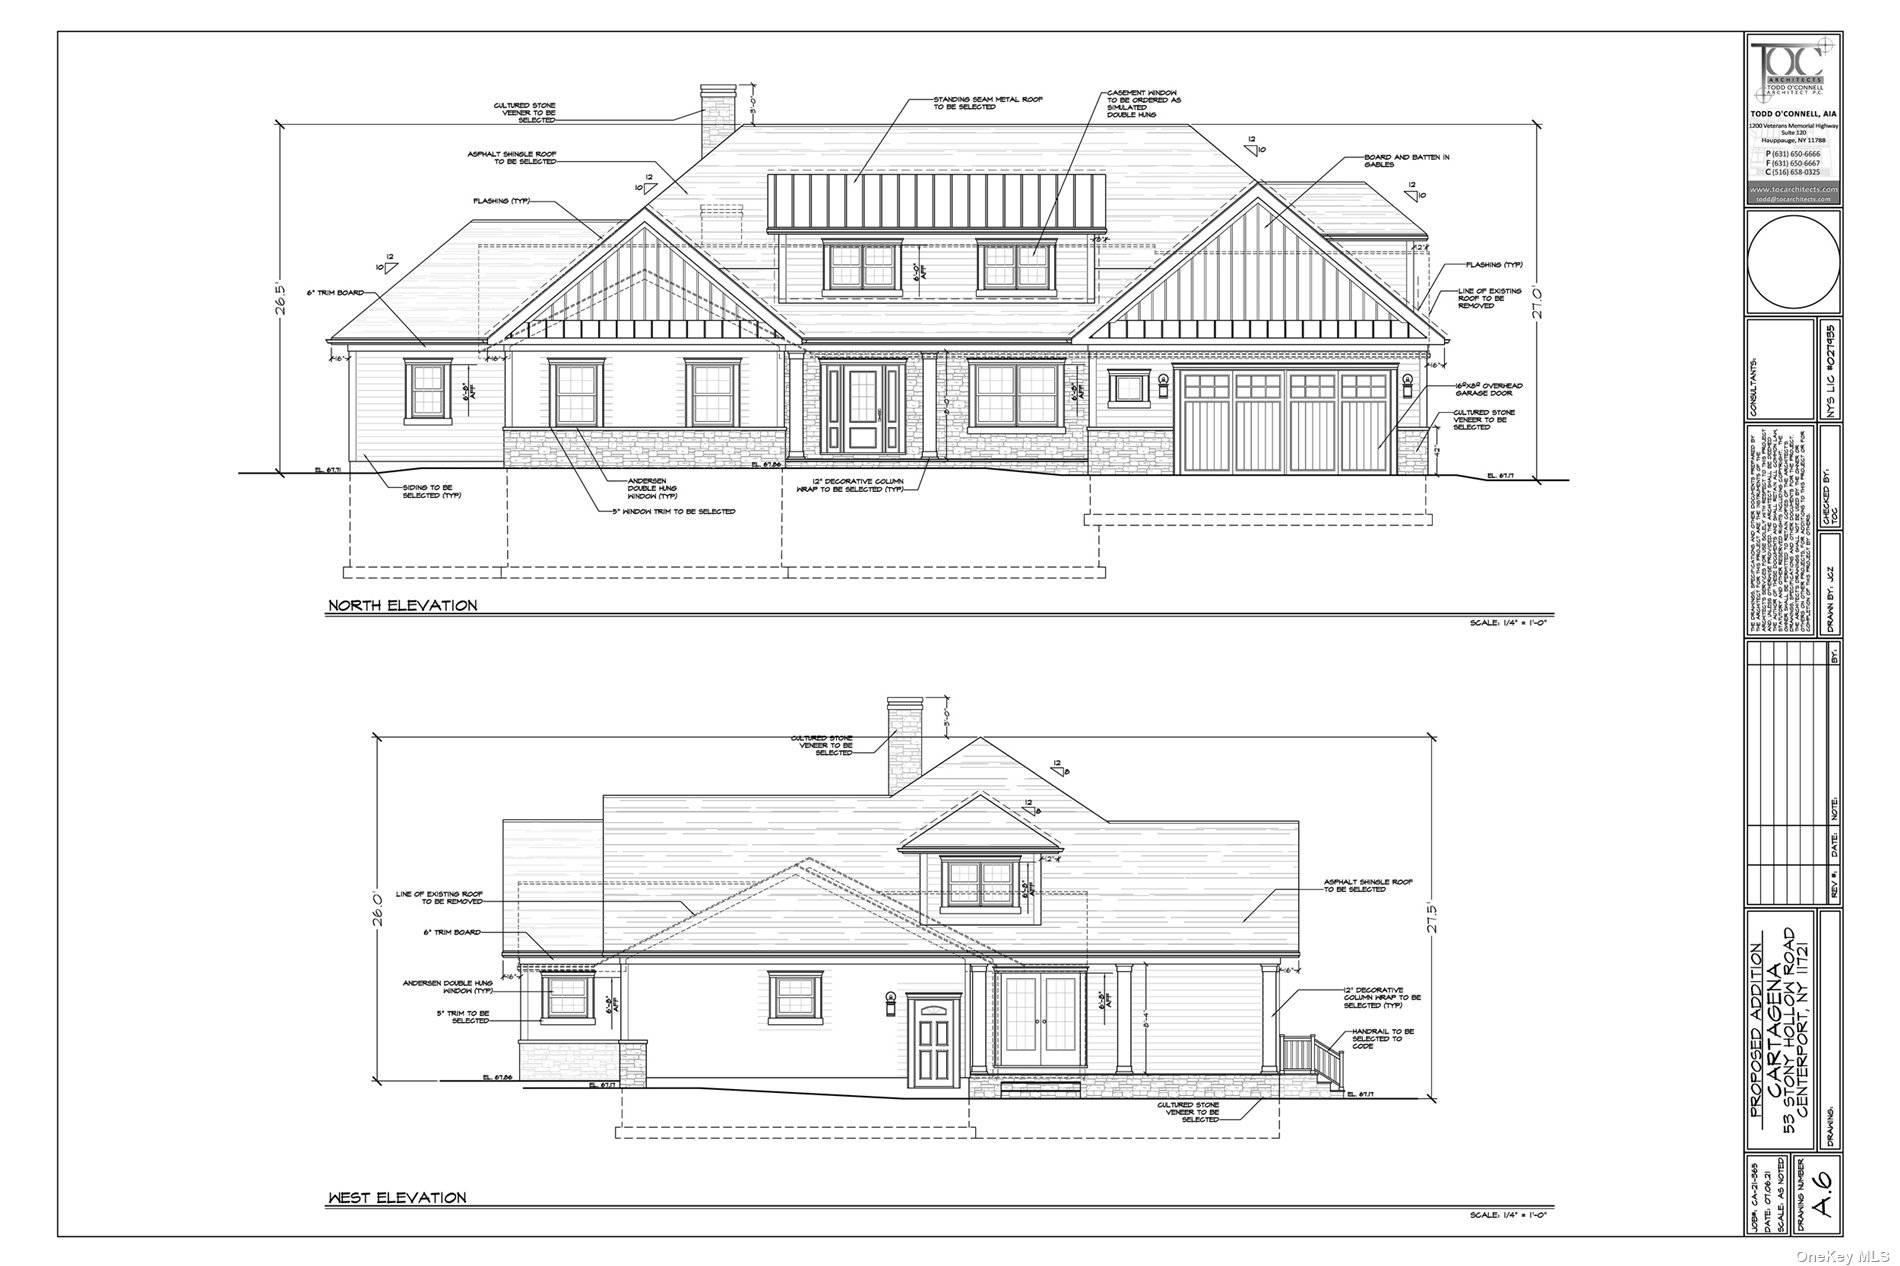 Pick up and run with approved building plans to create the home of your dreams on a perfect acre property in award winning Harborfields Schools.